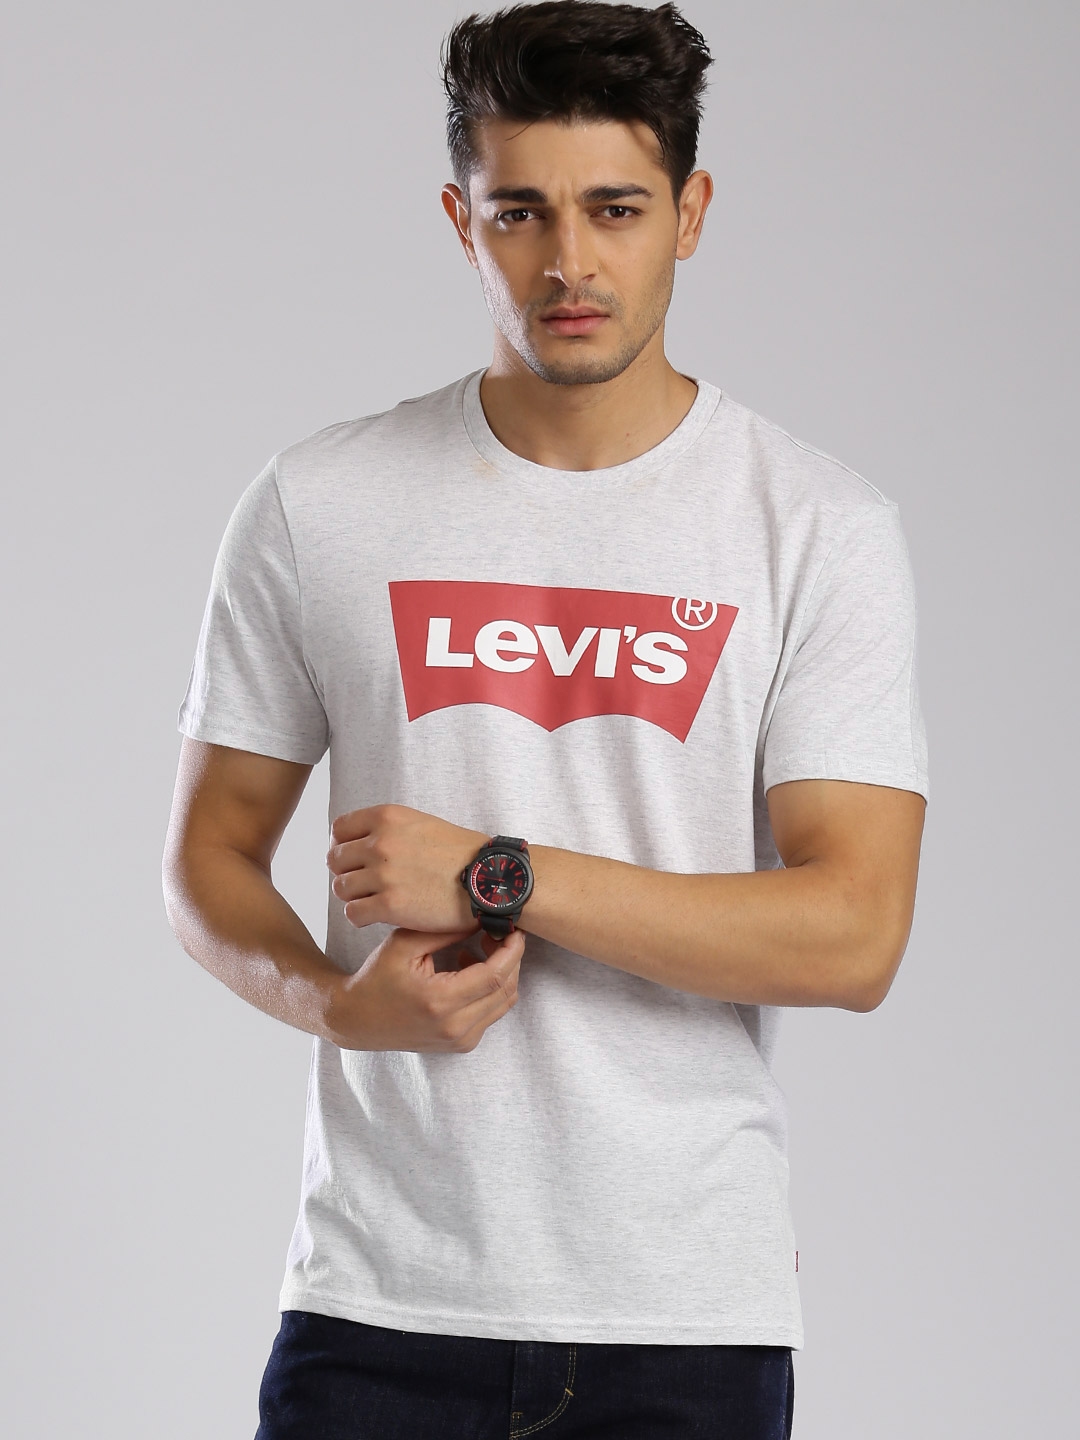 levis white shirt with red logo